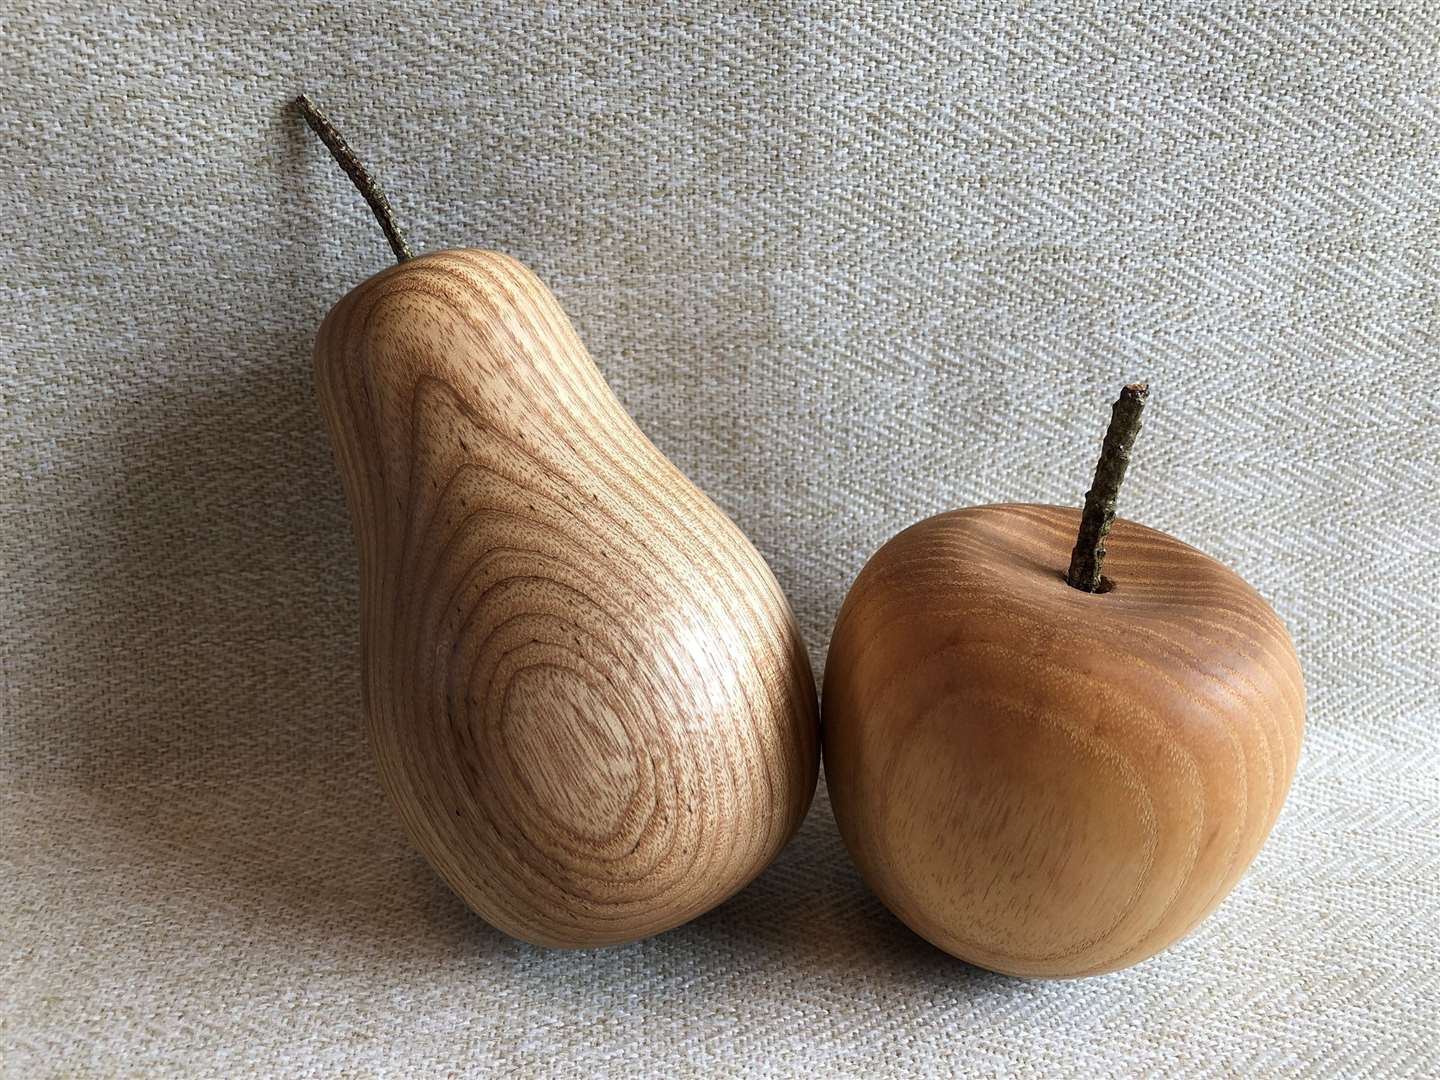 Joshua Irving of North Coast Wood Turning.  All of its products are hand turned and made from predominantly British hardwoods.  His main creations are art bowls, kitchen utensils and various haberdashery items.